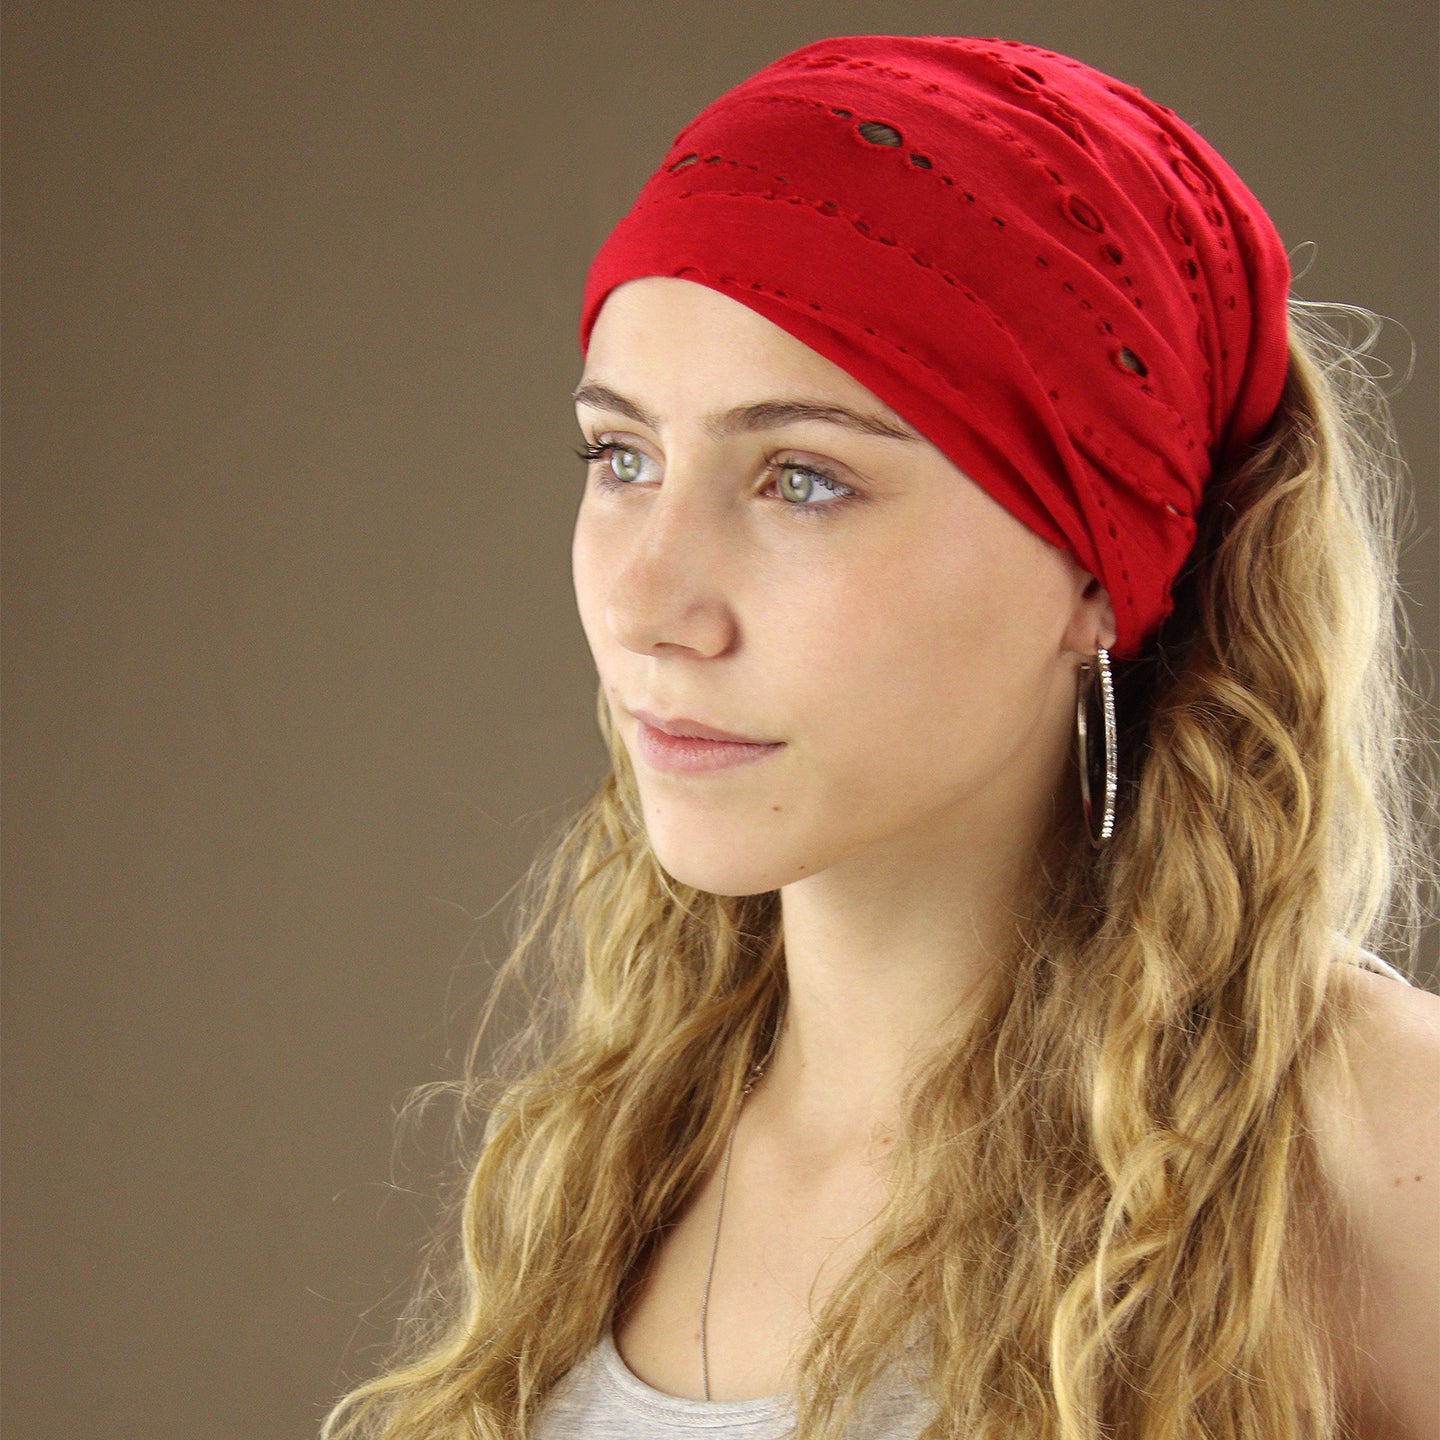 Extra-Wide Cotton Tube Durag Headband - Red